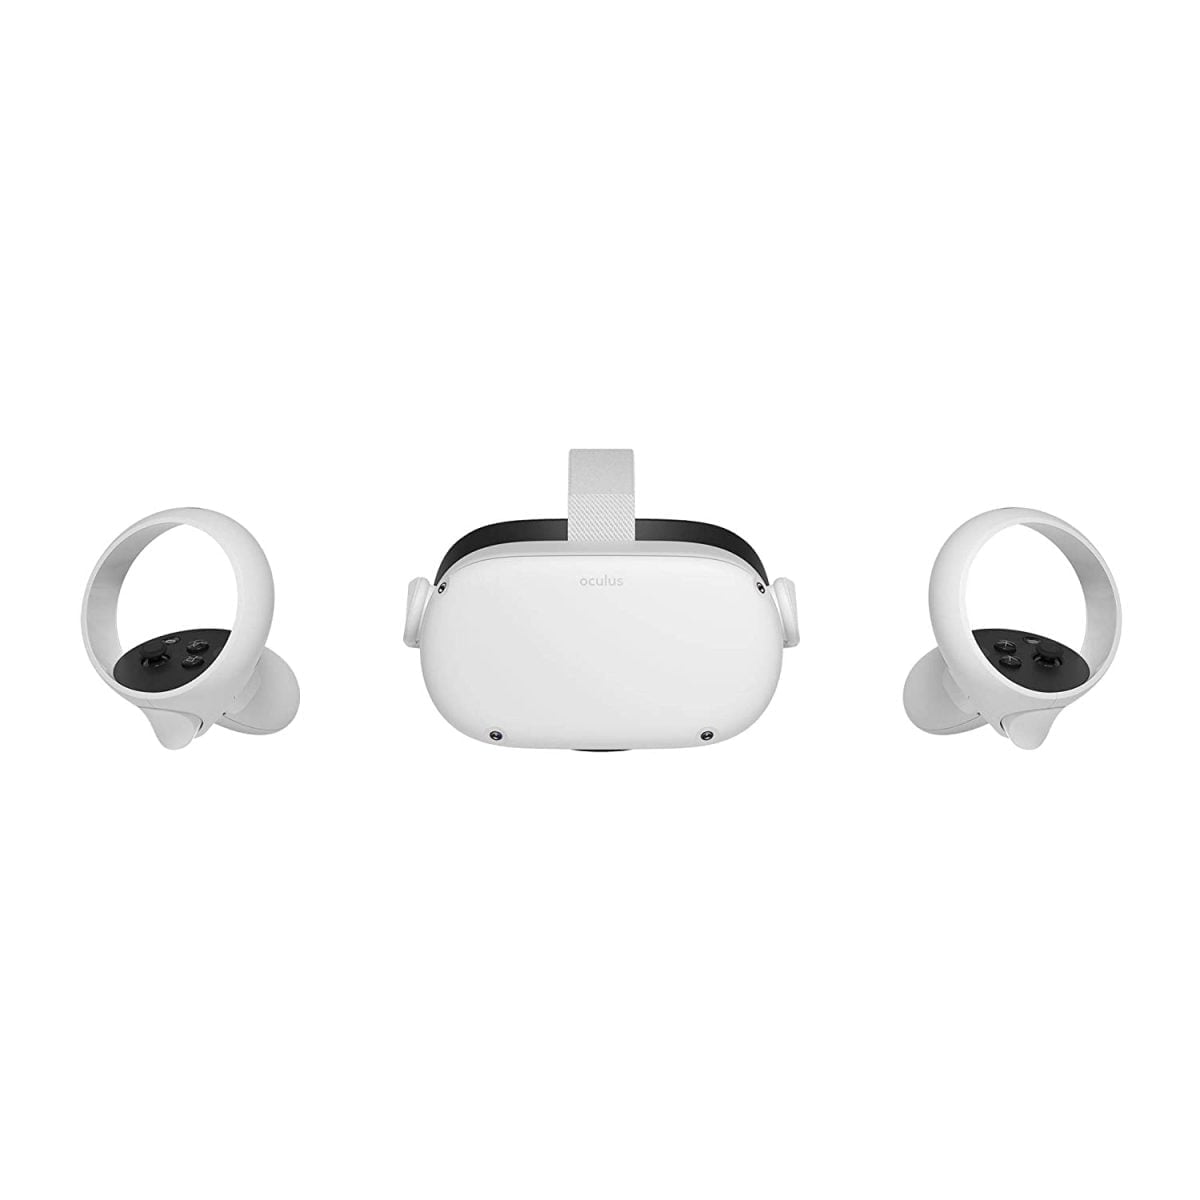 61Nrs7Qqzel. Sl1500 Https://Youtu.be/Atvgl9Wojsm Oculus Quest 2 Oculus Quest 2 — Advanced All-In-One Virtual Reality Headset — 64 Gb